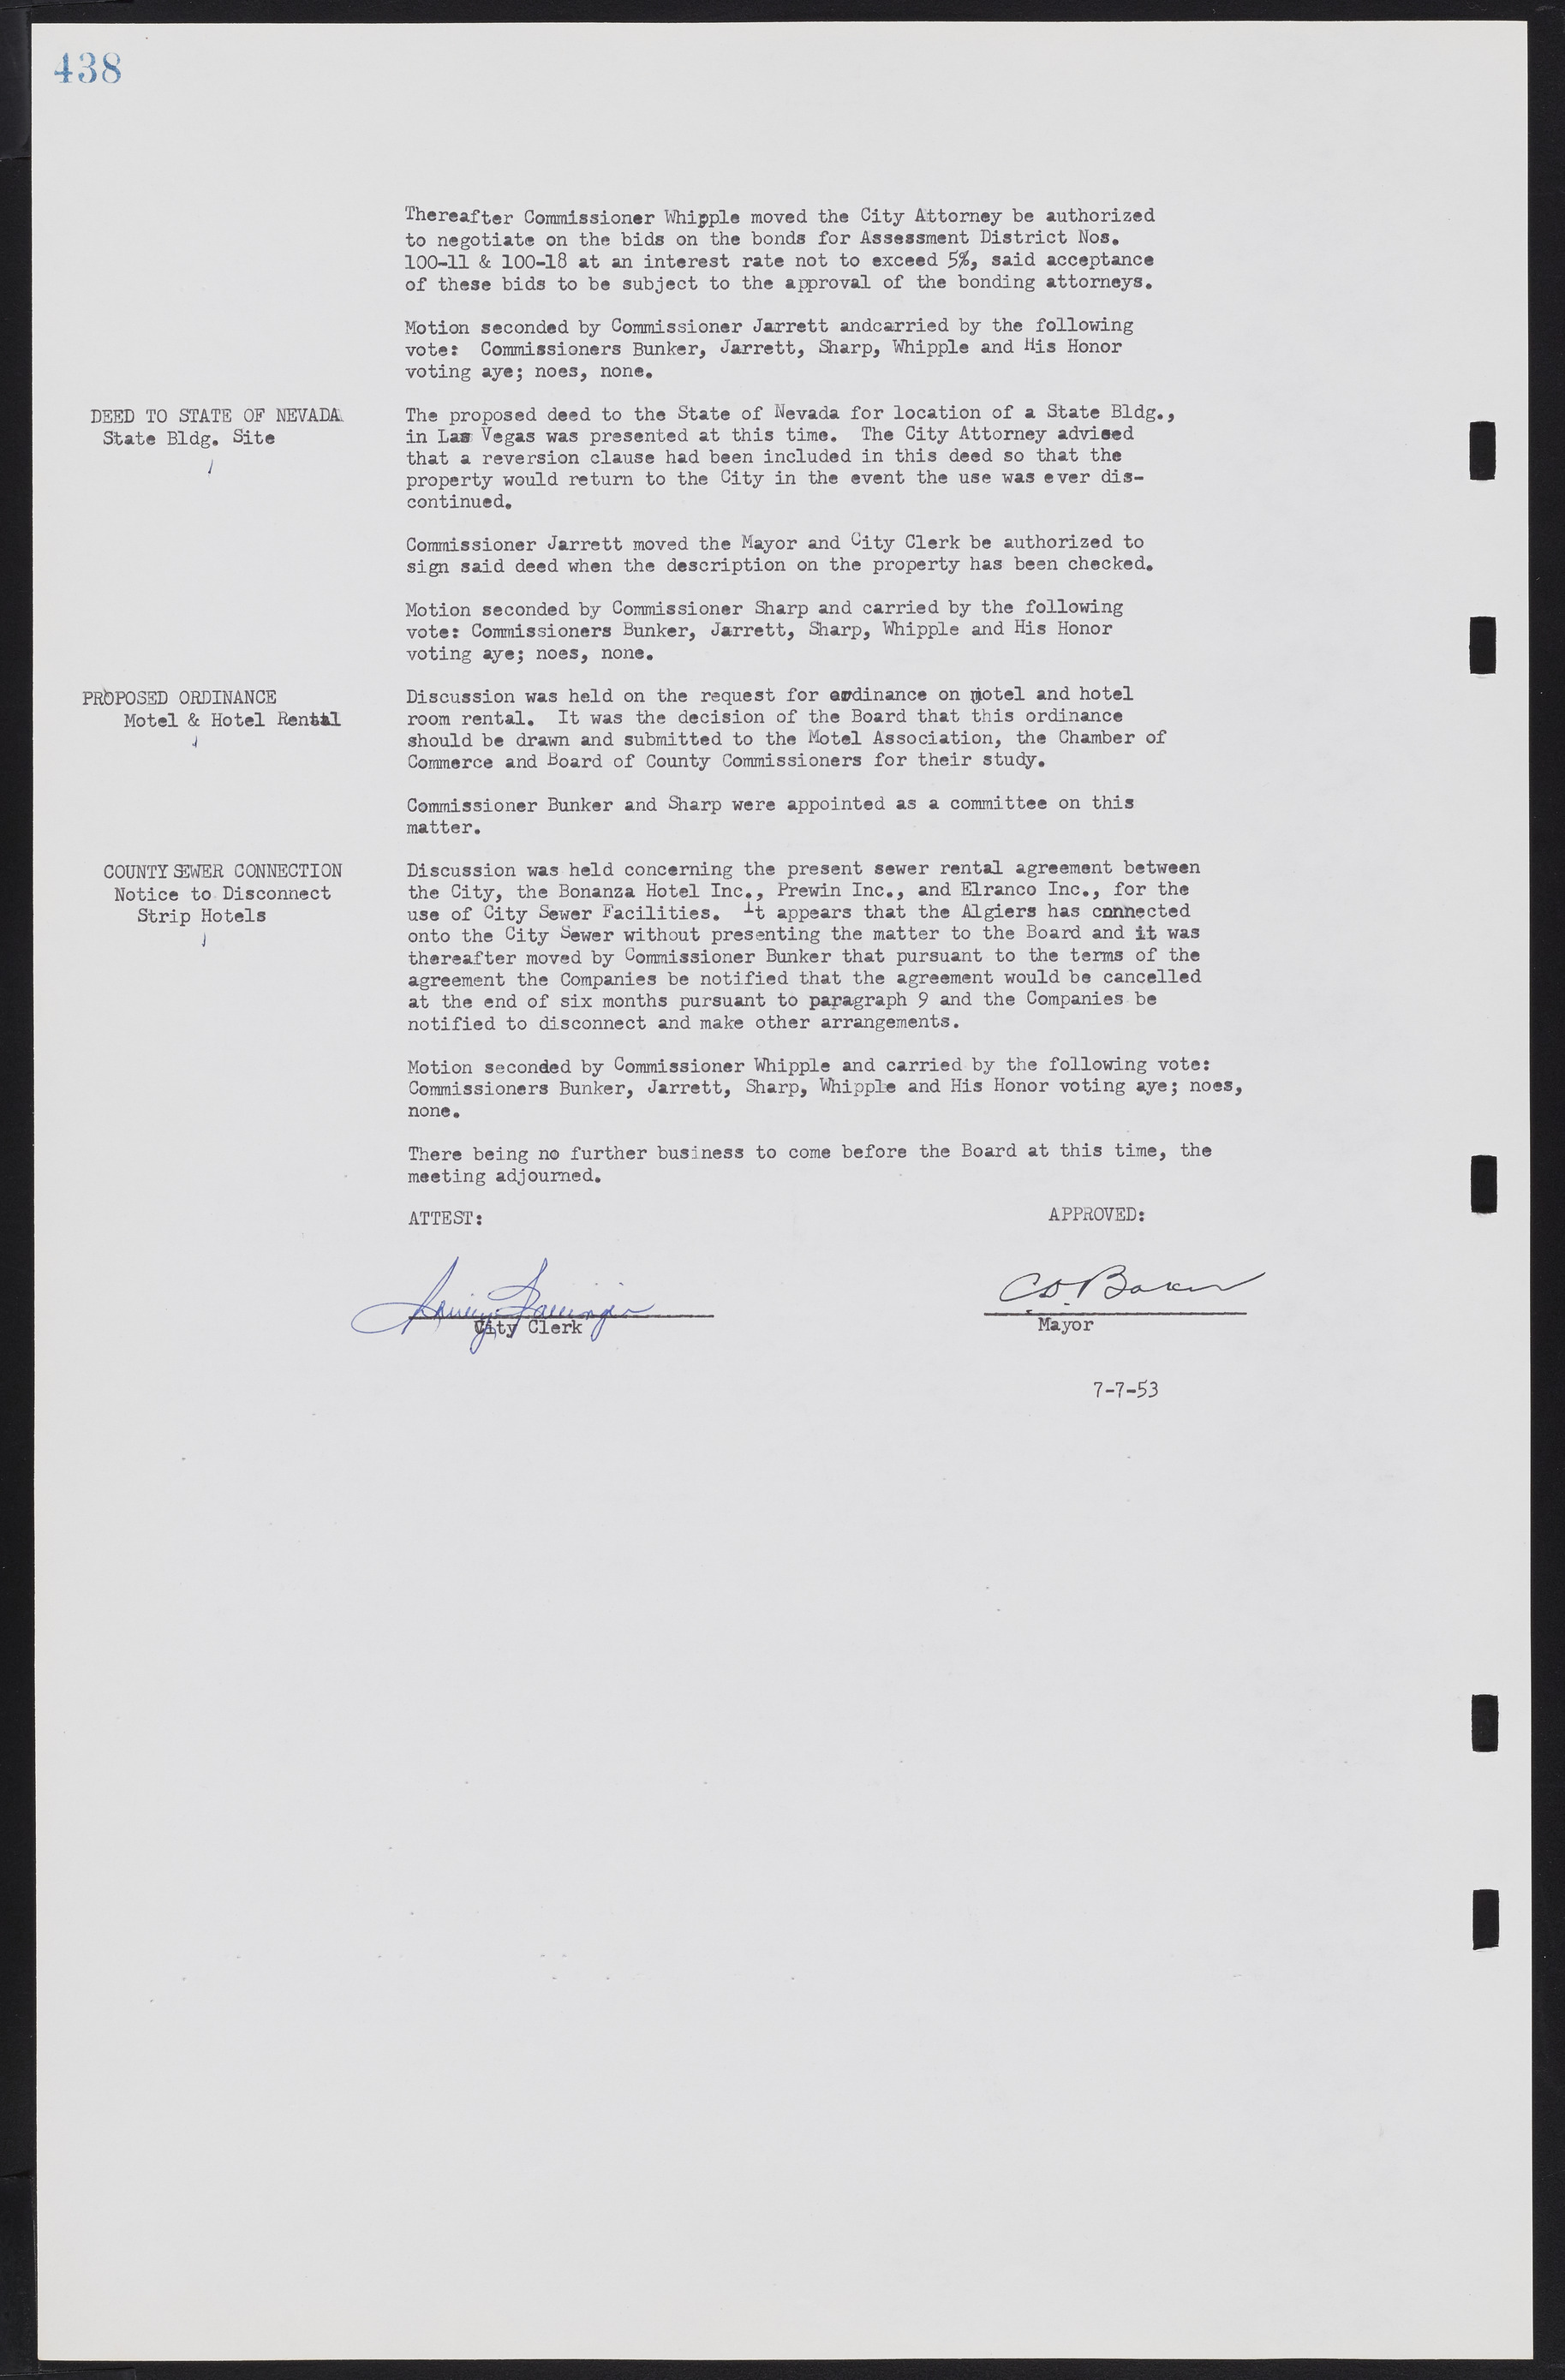 Las Vegas City Commission Minutes, May 26, 1952 to February 17, 1954, lvc000008-468